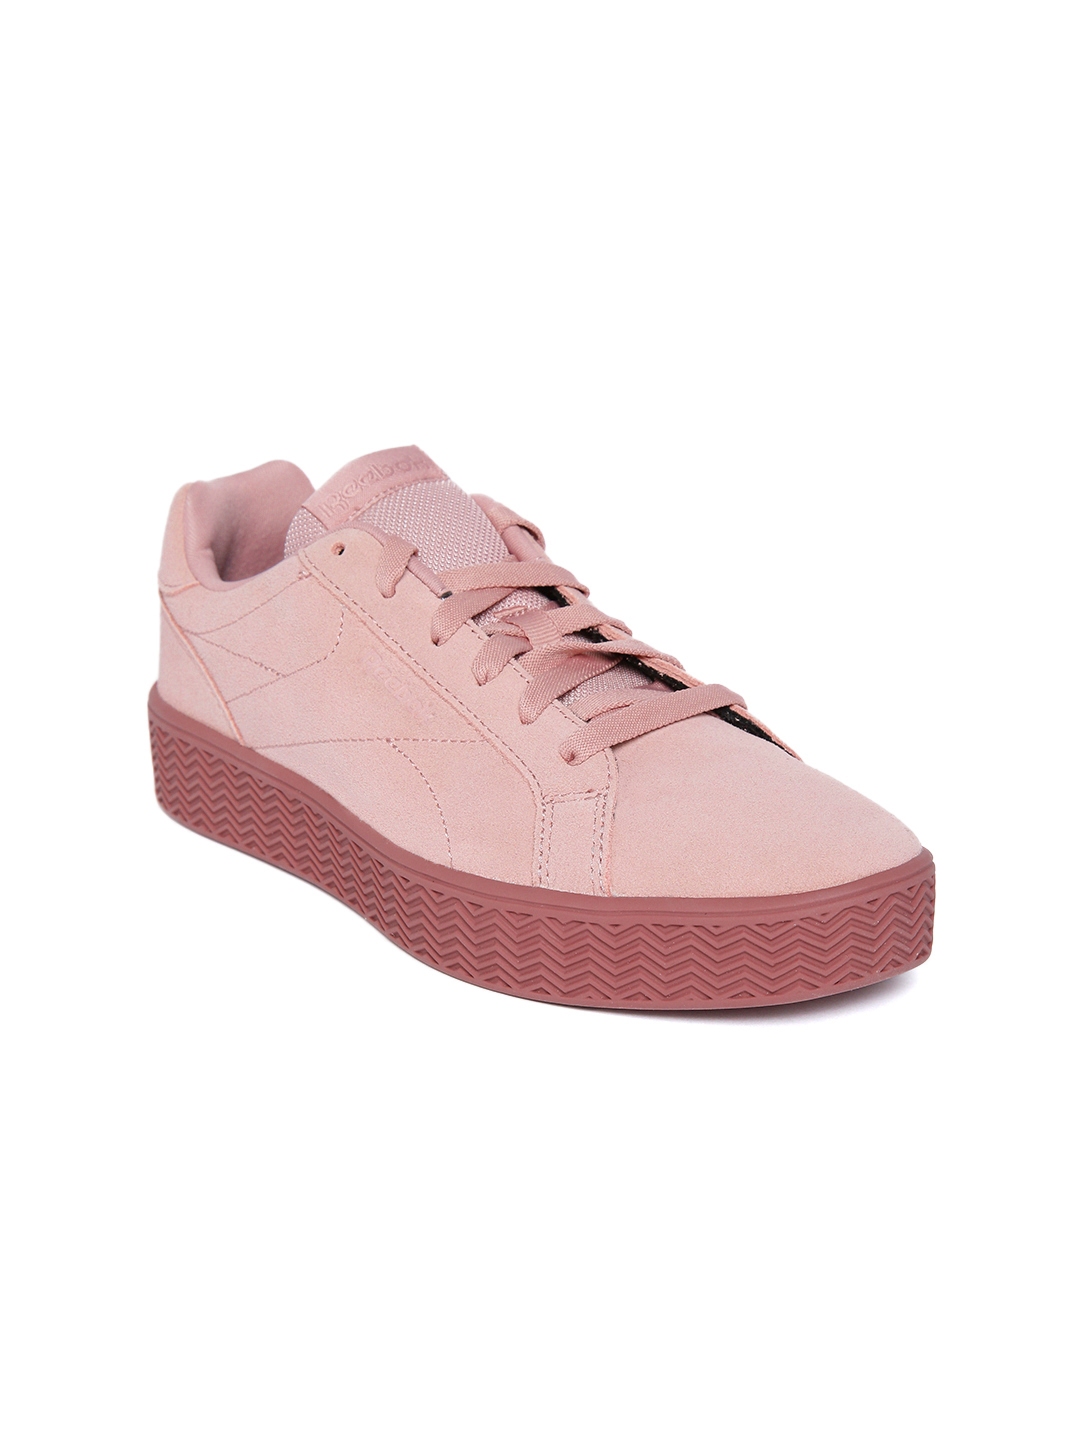 Reebok Classic Women Dusty Pink Royal Complete PFM Suede - Casual Shoes for Women 8497757 | Myntra